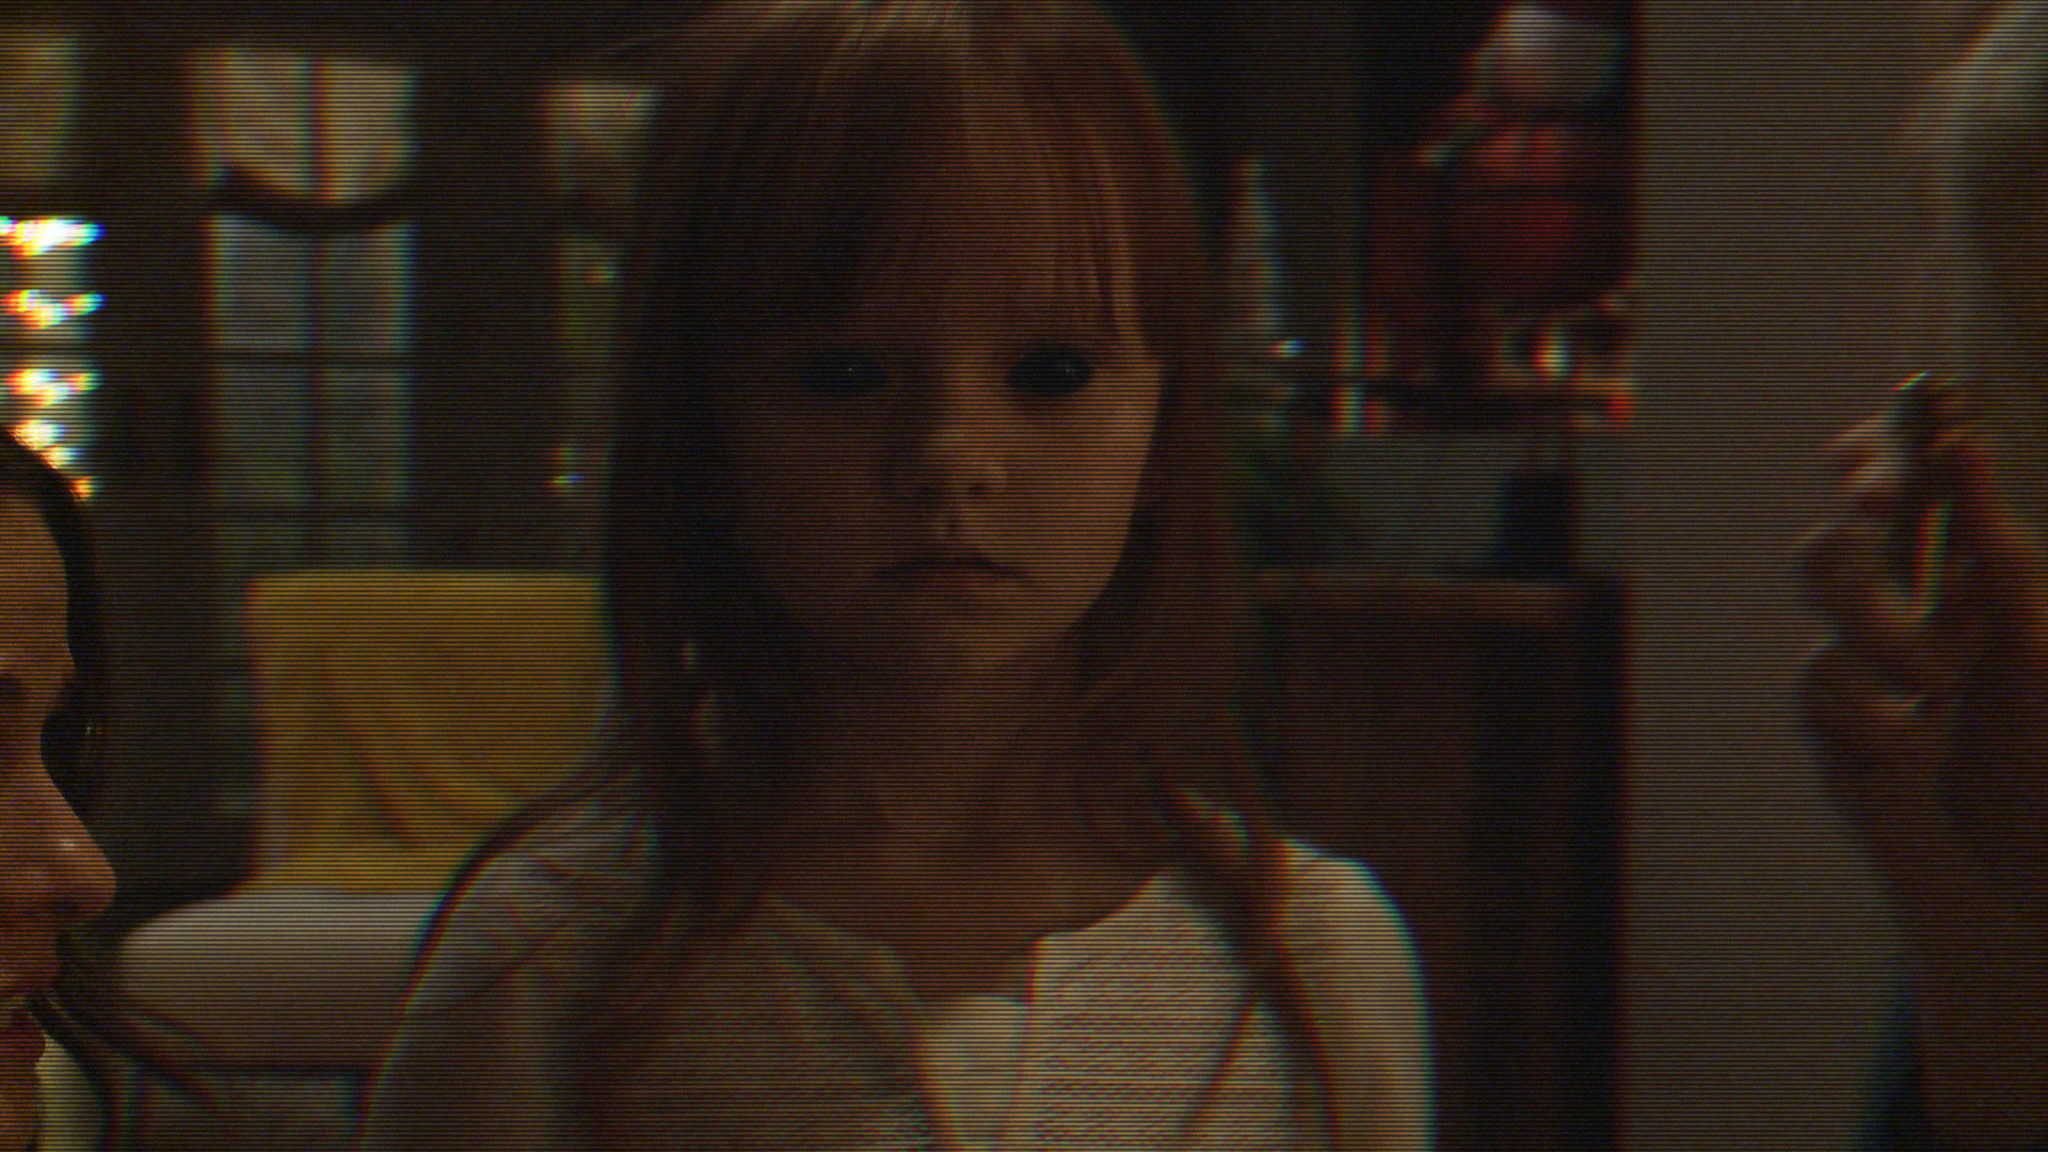 PARANORMAL ACTIVITY: THE GHOST DIMENSION Trailer